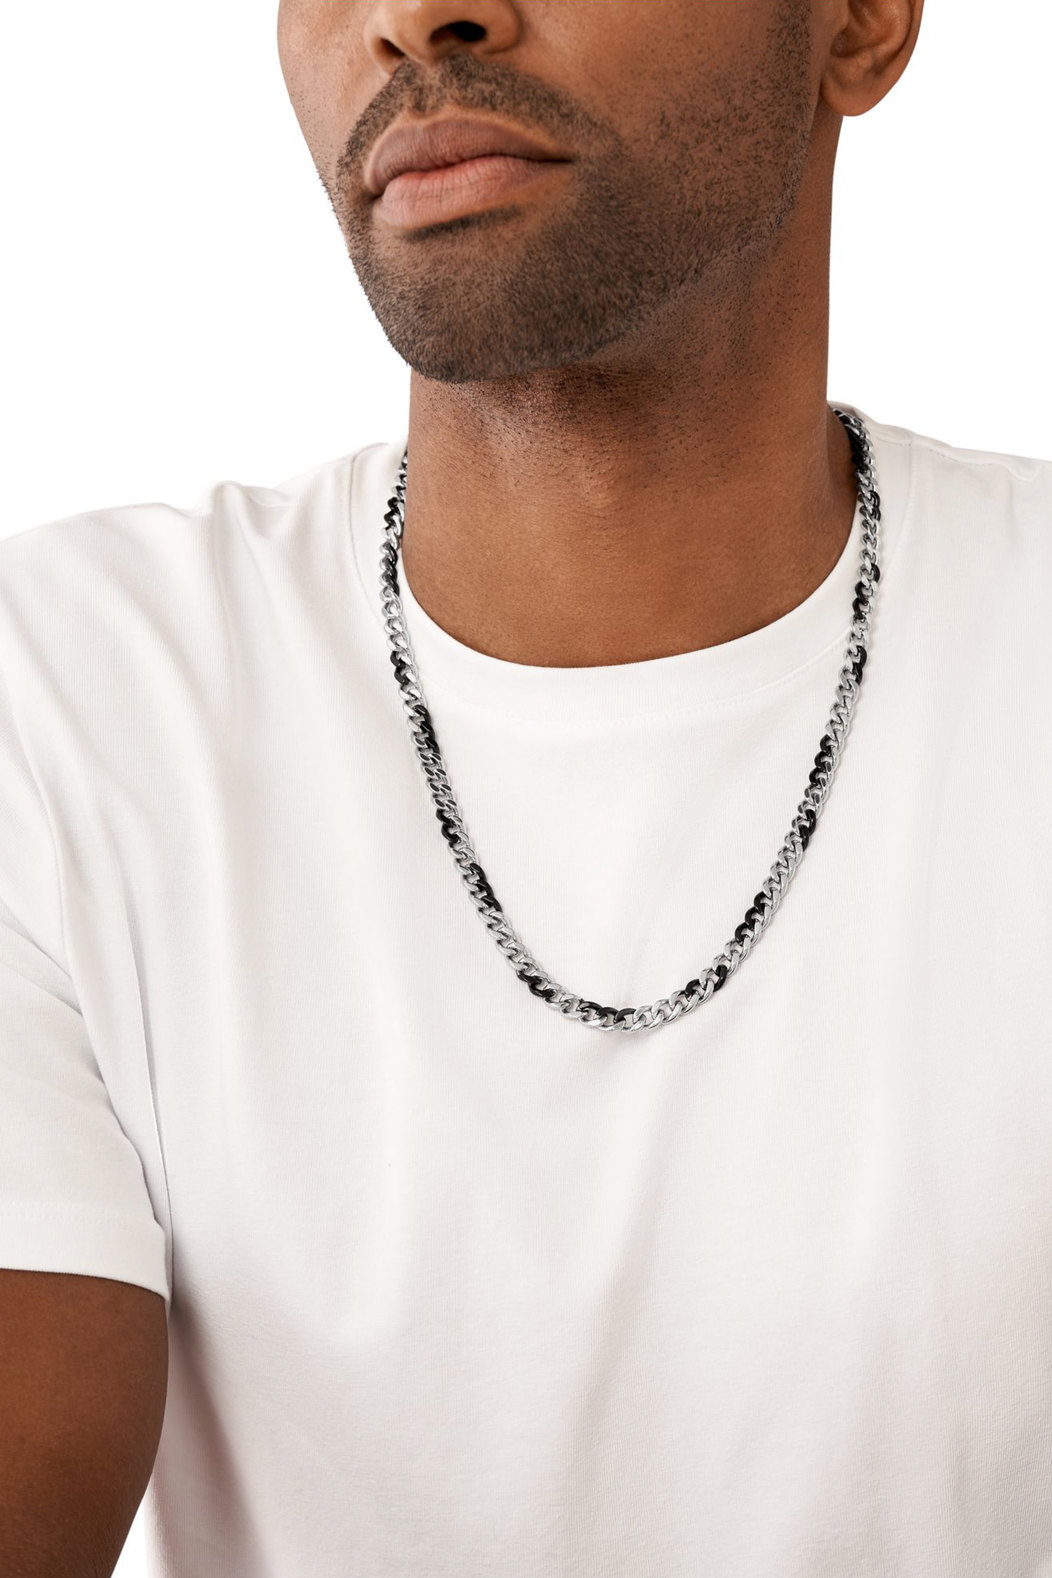 Two-Tone Stainless Steel Chain Necklace